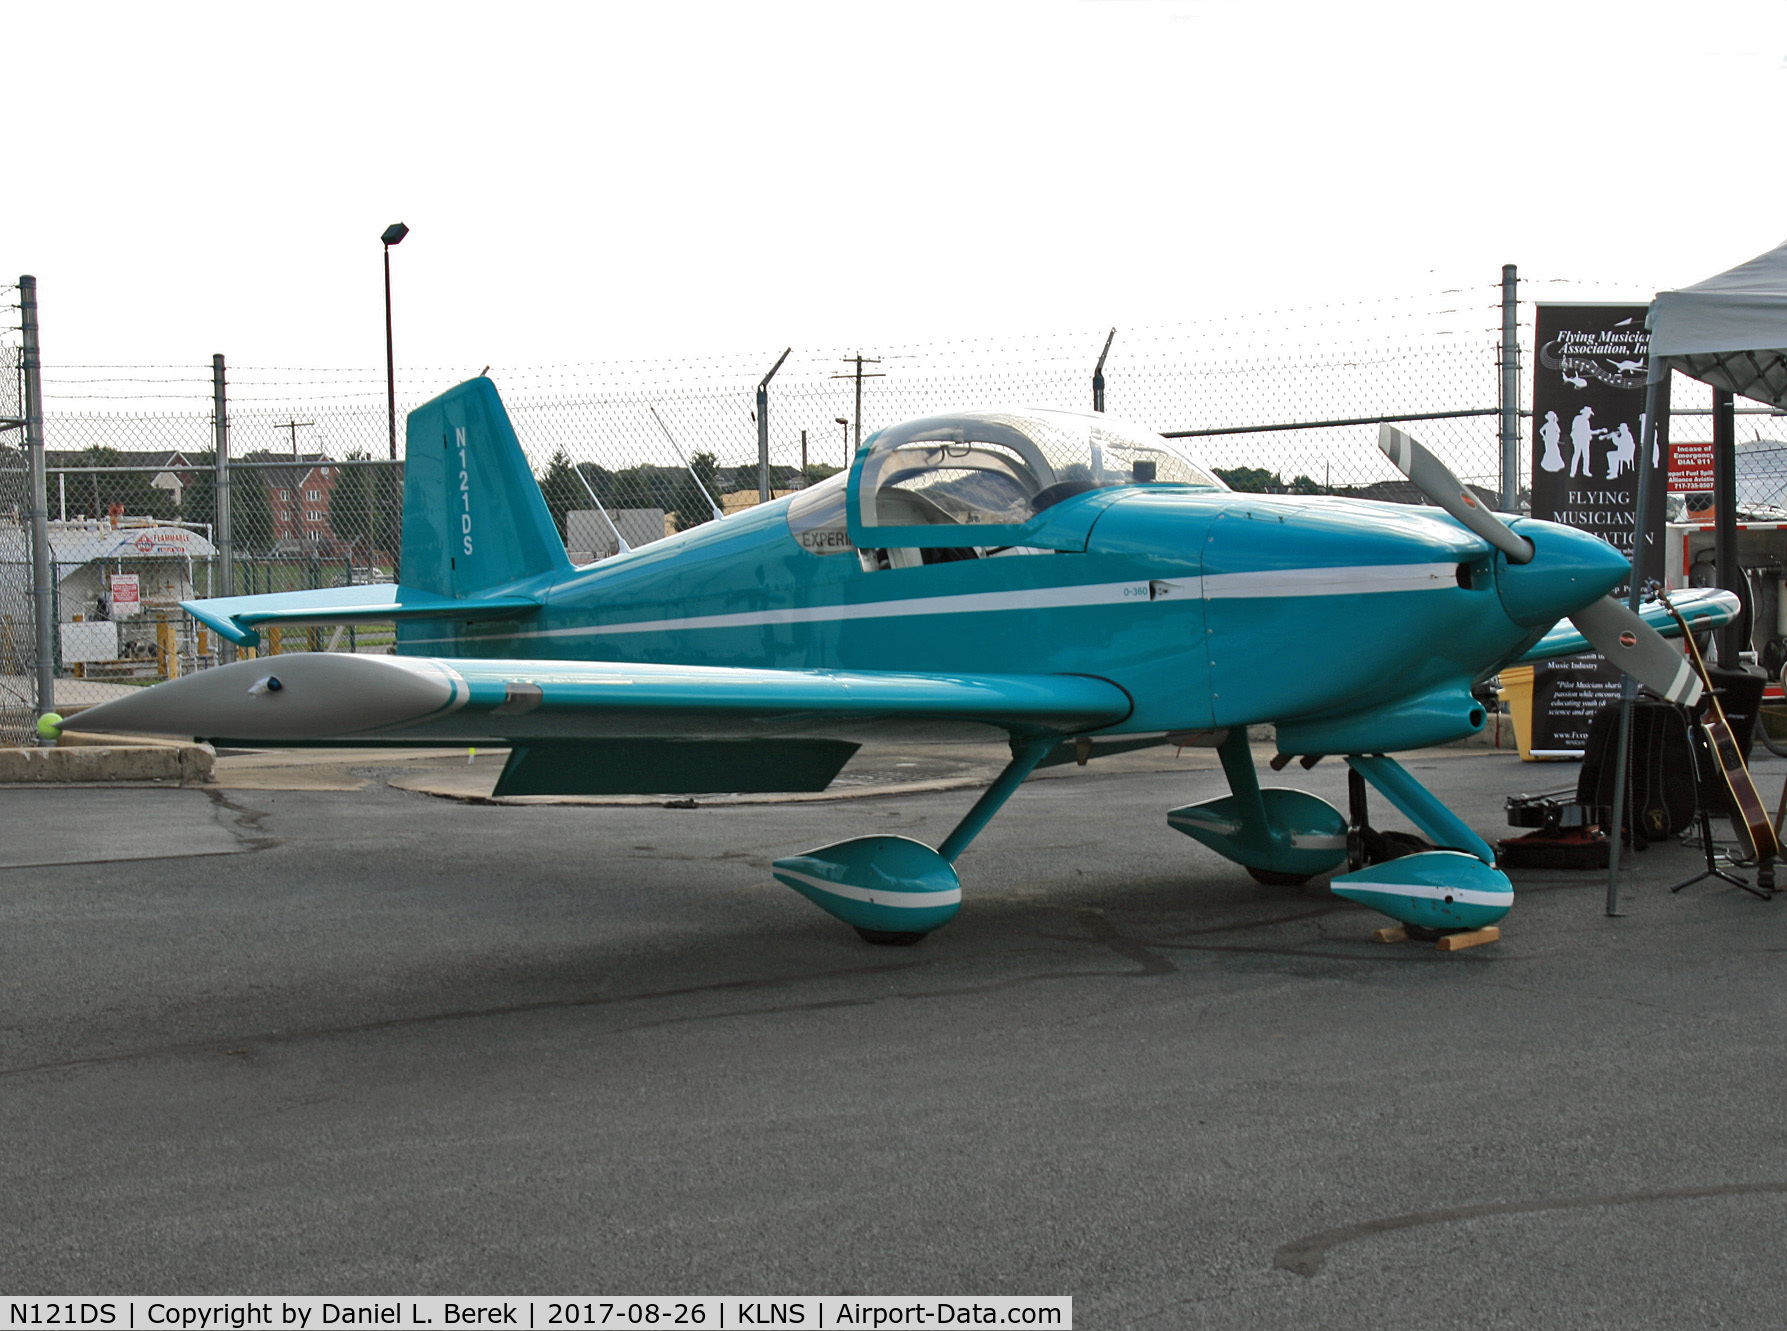 N121DS, 1995 Vans RV-6A C/N 22373, Usually, these Vans kit planes are tail draggers. Not this turquoise blue example.